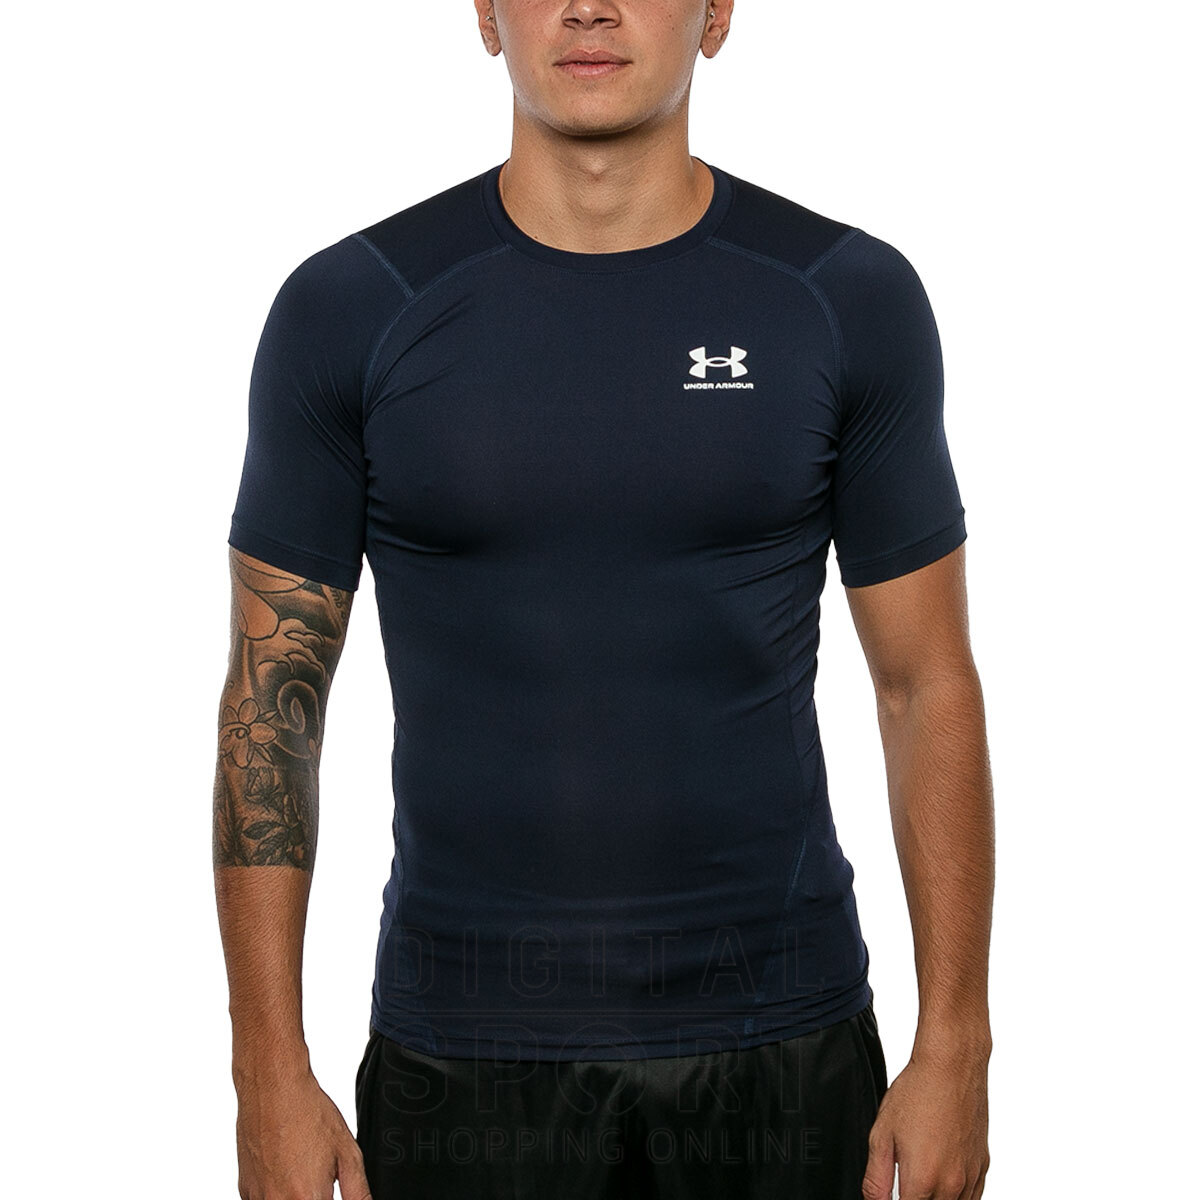 REMERA COMPRESION HG COMP UNDER ARMOUR | SPORT 78